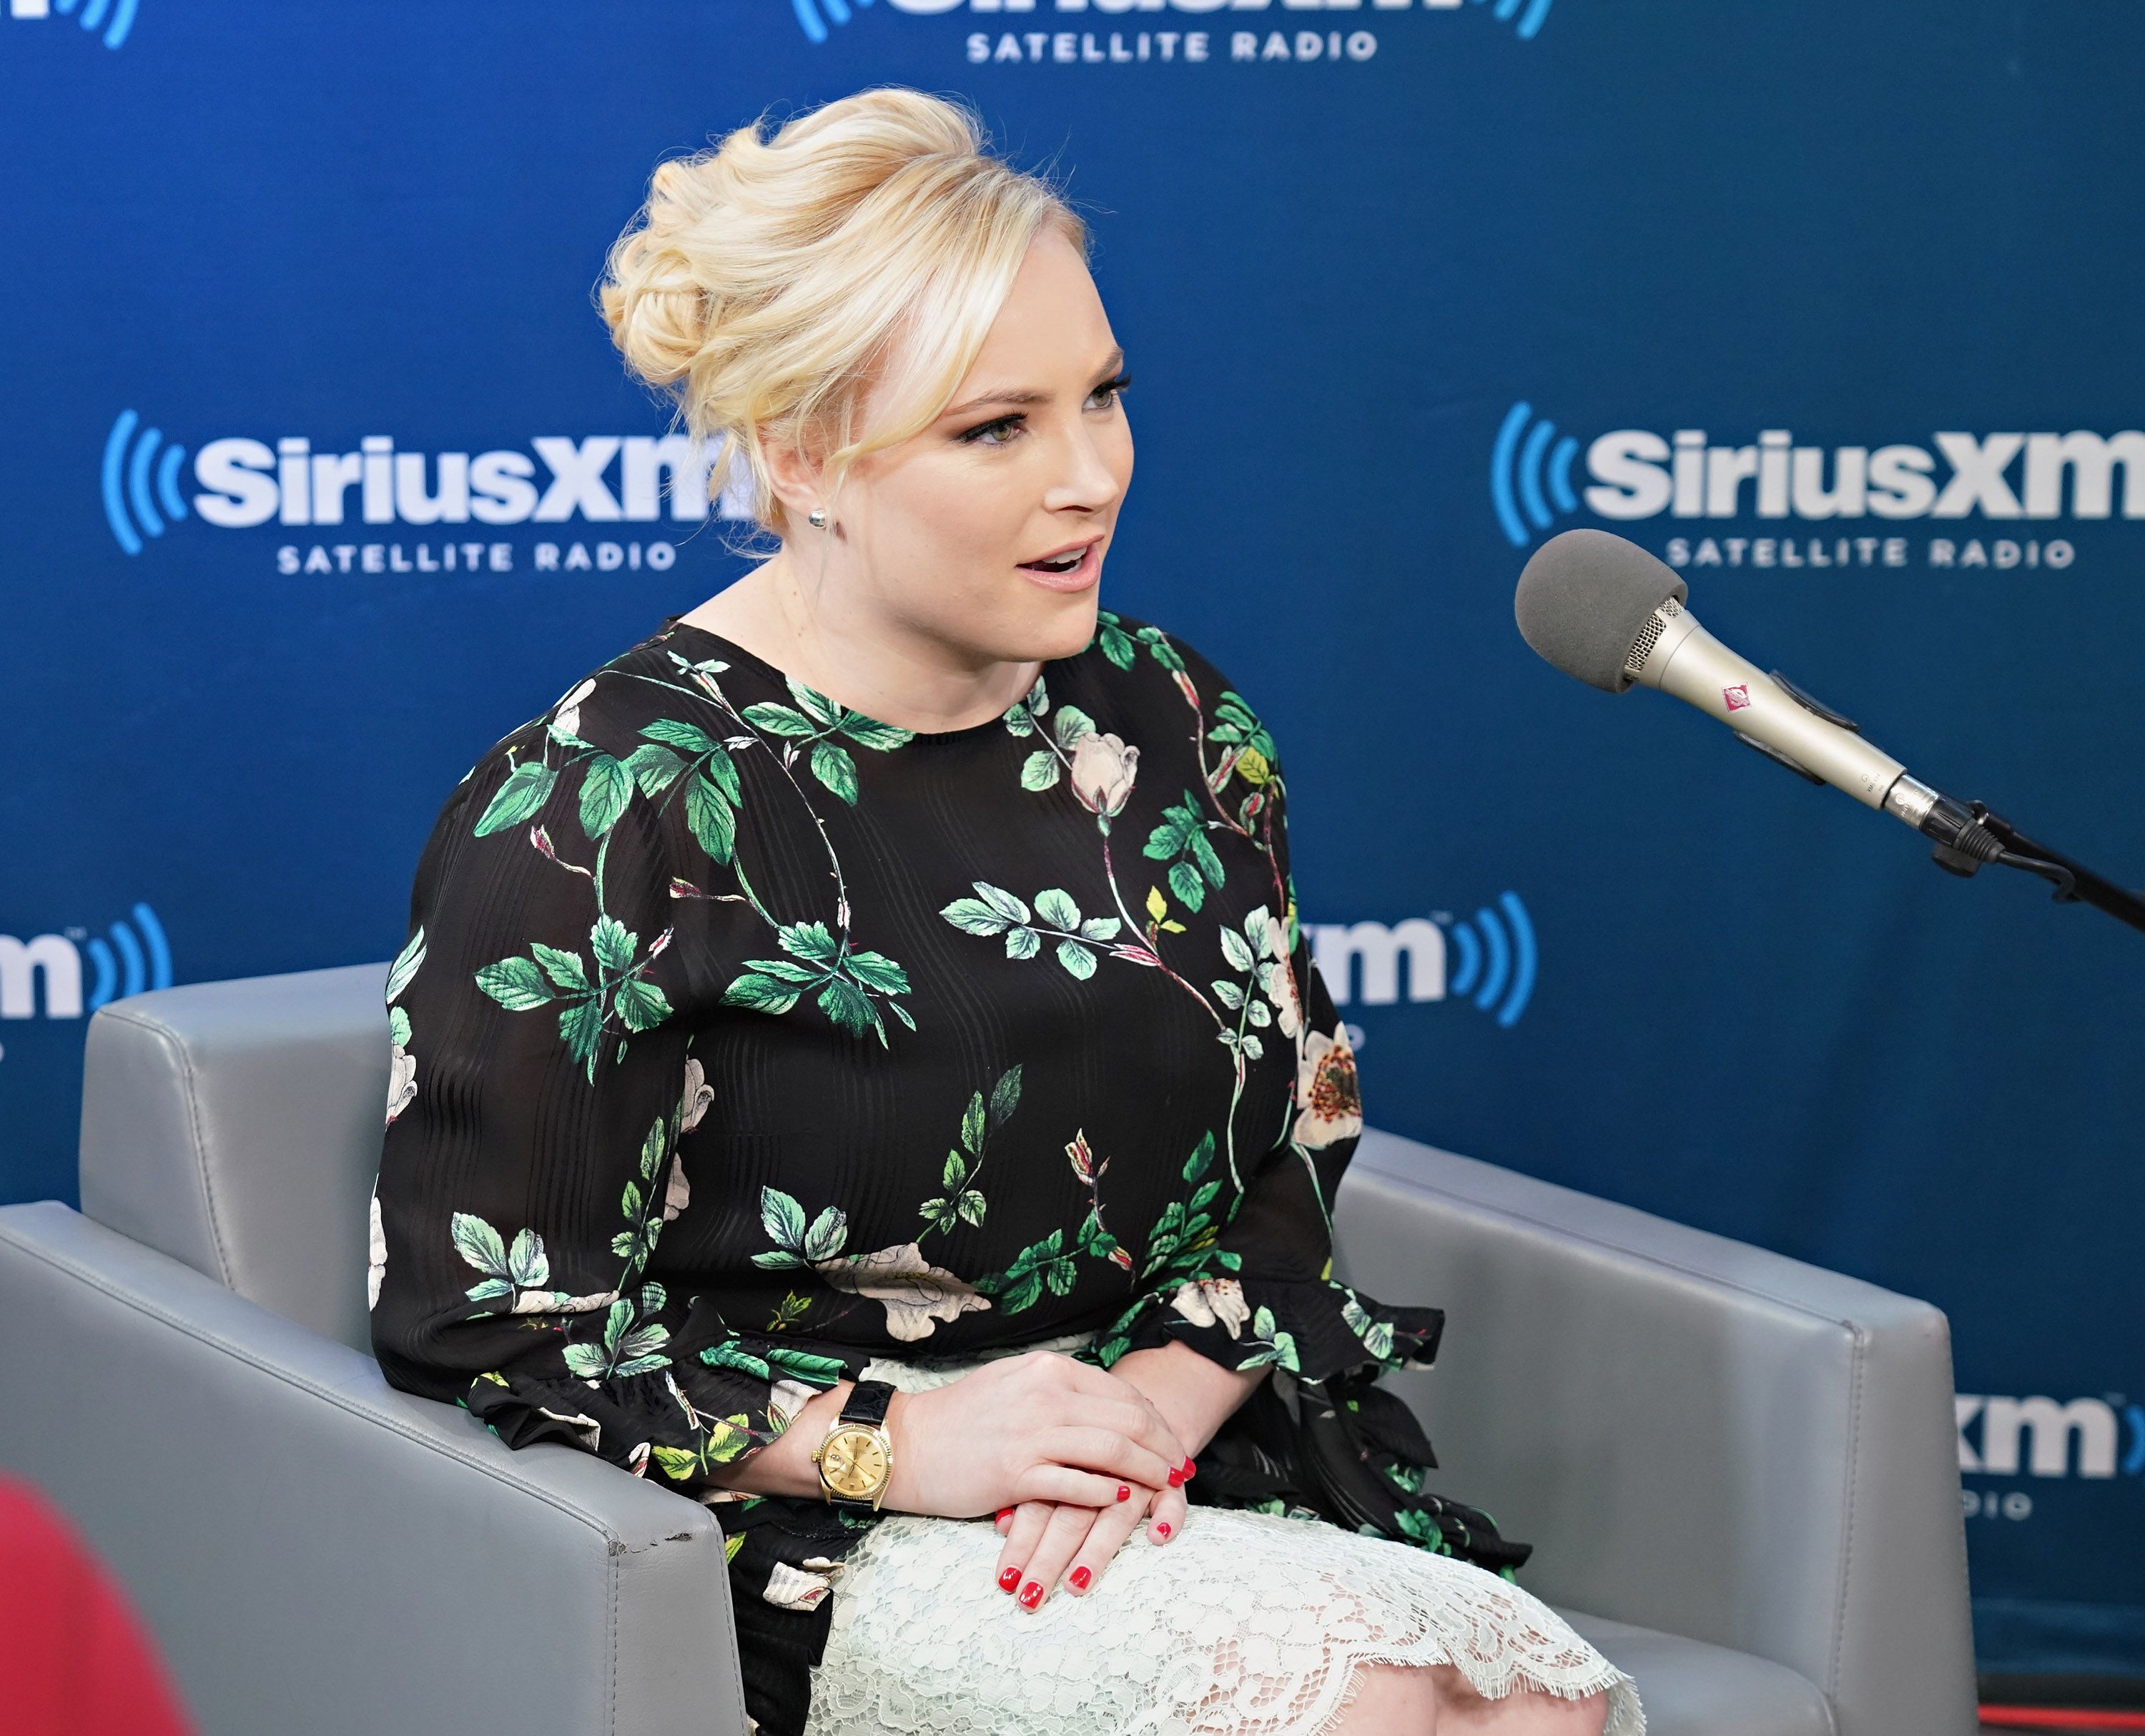 Meghan McCain joins host Julie Mason at a SiriusXM event on February 5, 2018 | Photo: Getty Images